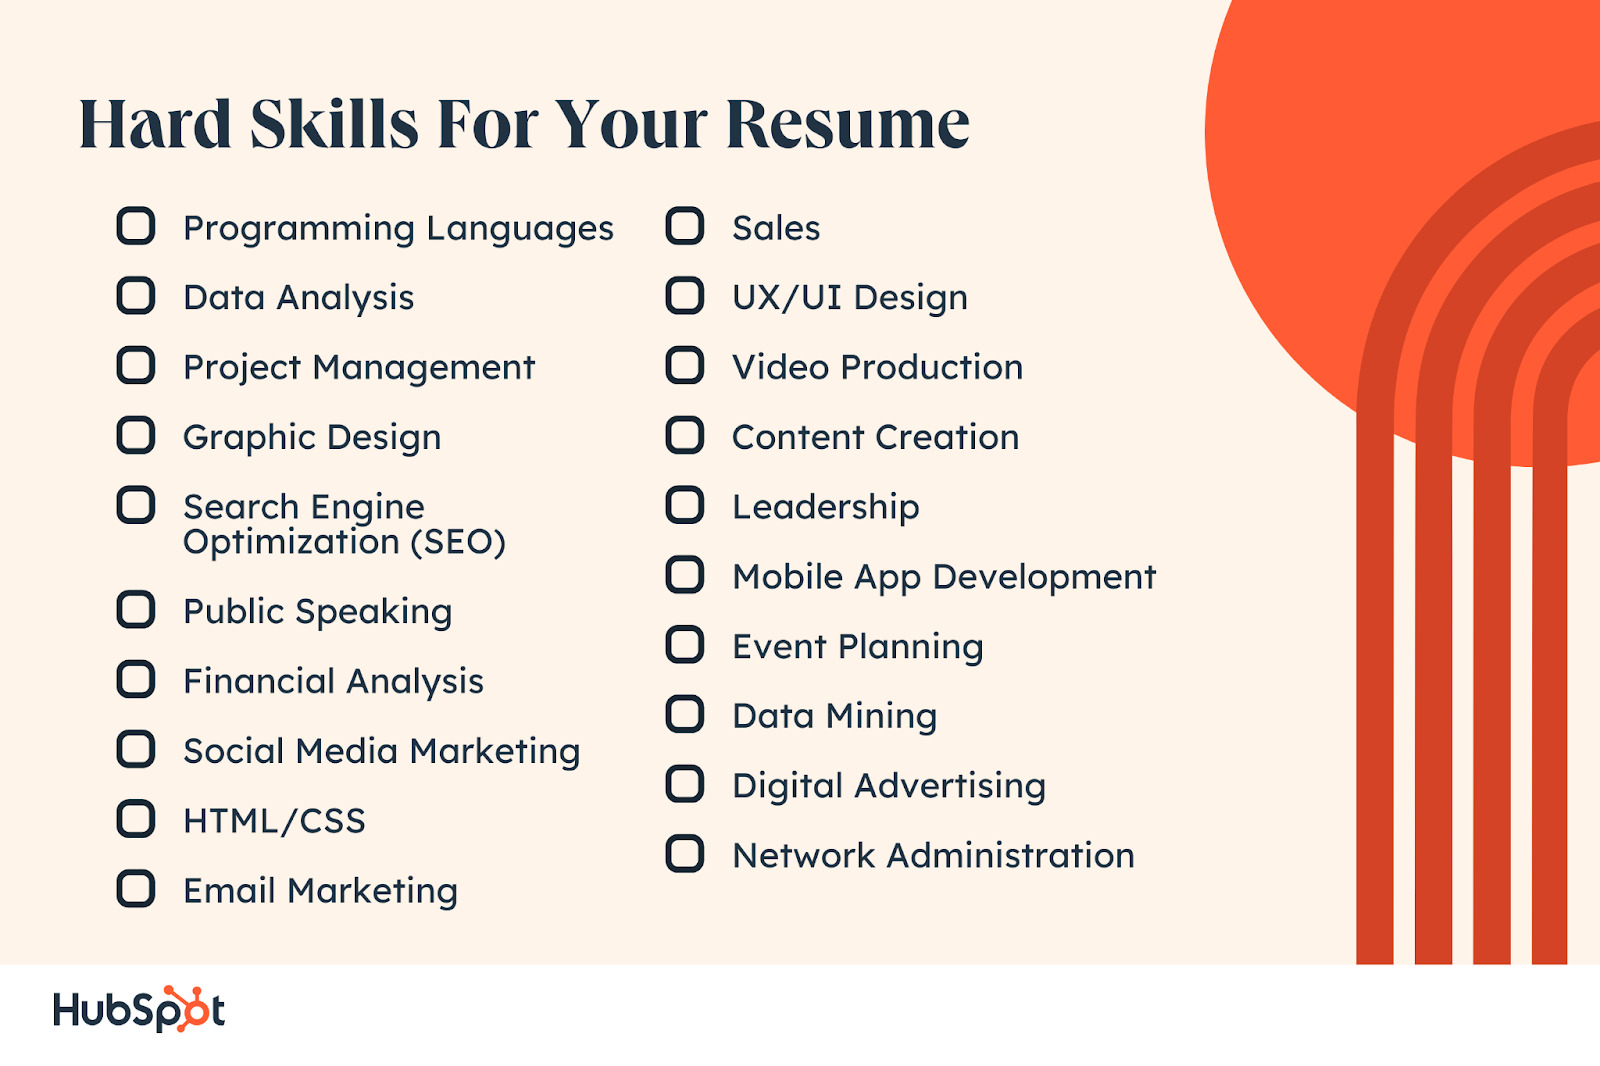 hard skills for your resume. Programming Languages. Data Analysis. Project Management  Graphic Design. Search Engine Optimization (SEO). Public Speaking. Sales. UX/UI Design. Video Production. Content Creation. Leadership. Mobile App Development. Financial Analysis. Social Media Marketing. HTML/CSS. Email Marketing. Event Planning. Data Mining. Digital Advertising. Network Administration.